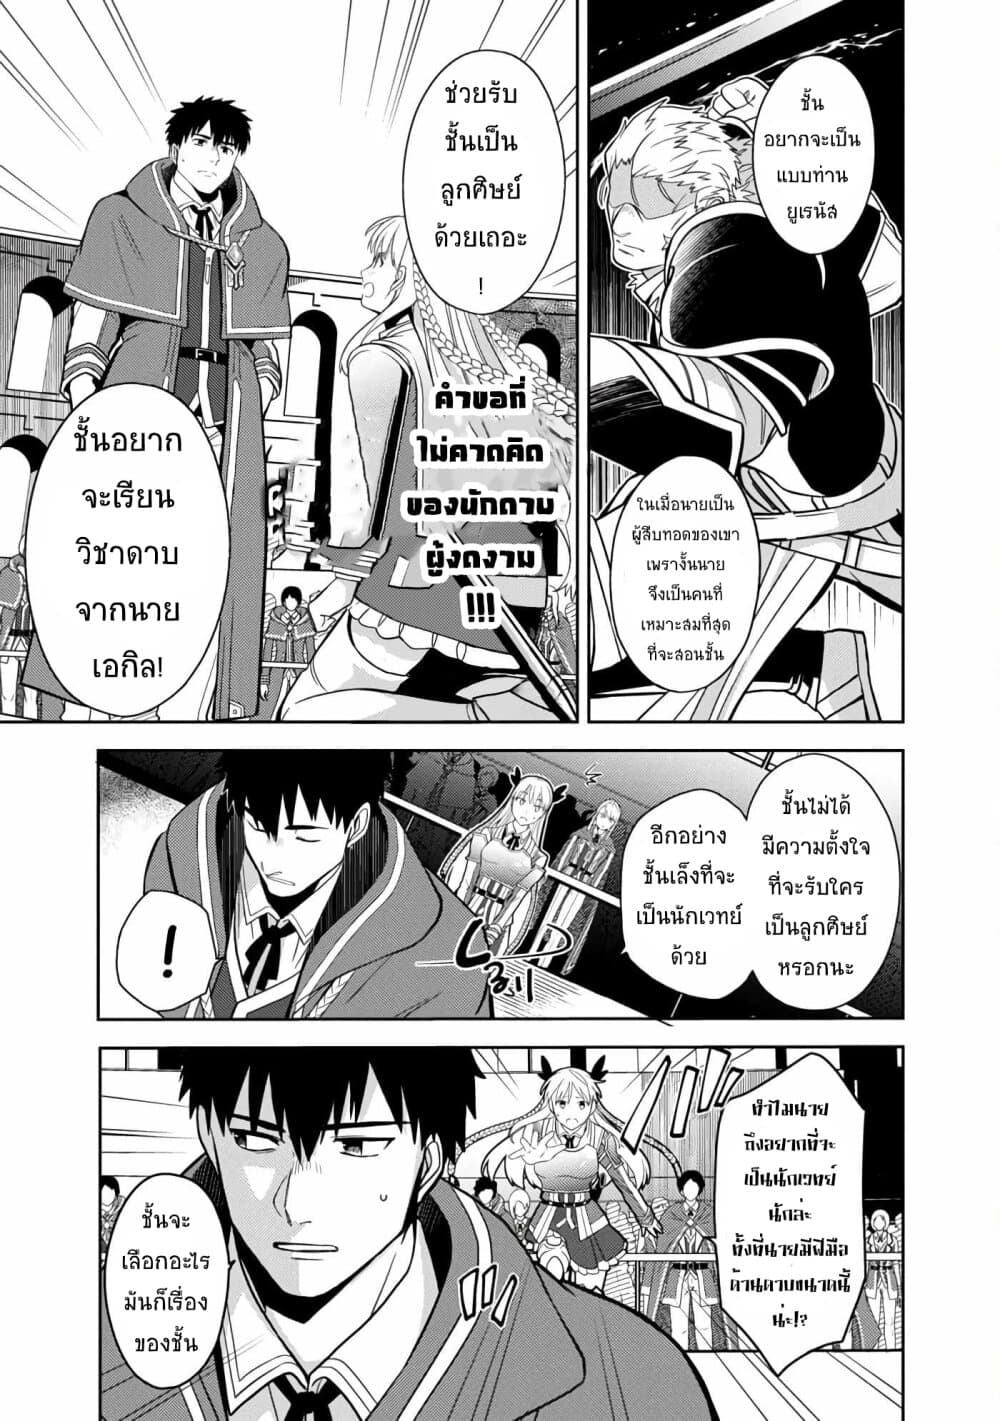 The Reincarnated Swordsman With 9999 Strength Wants to Become a Magician! ตอนที่ 4.1 (2)